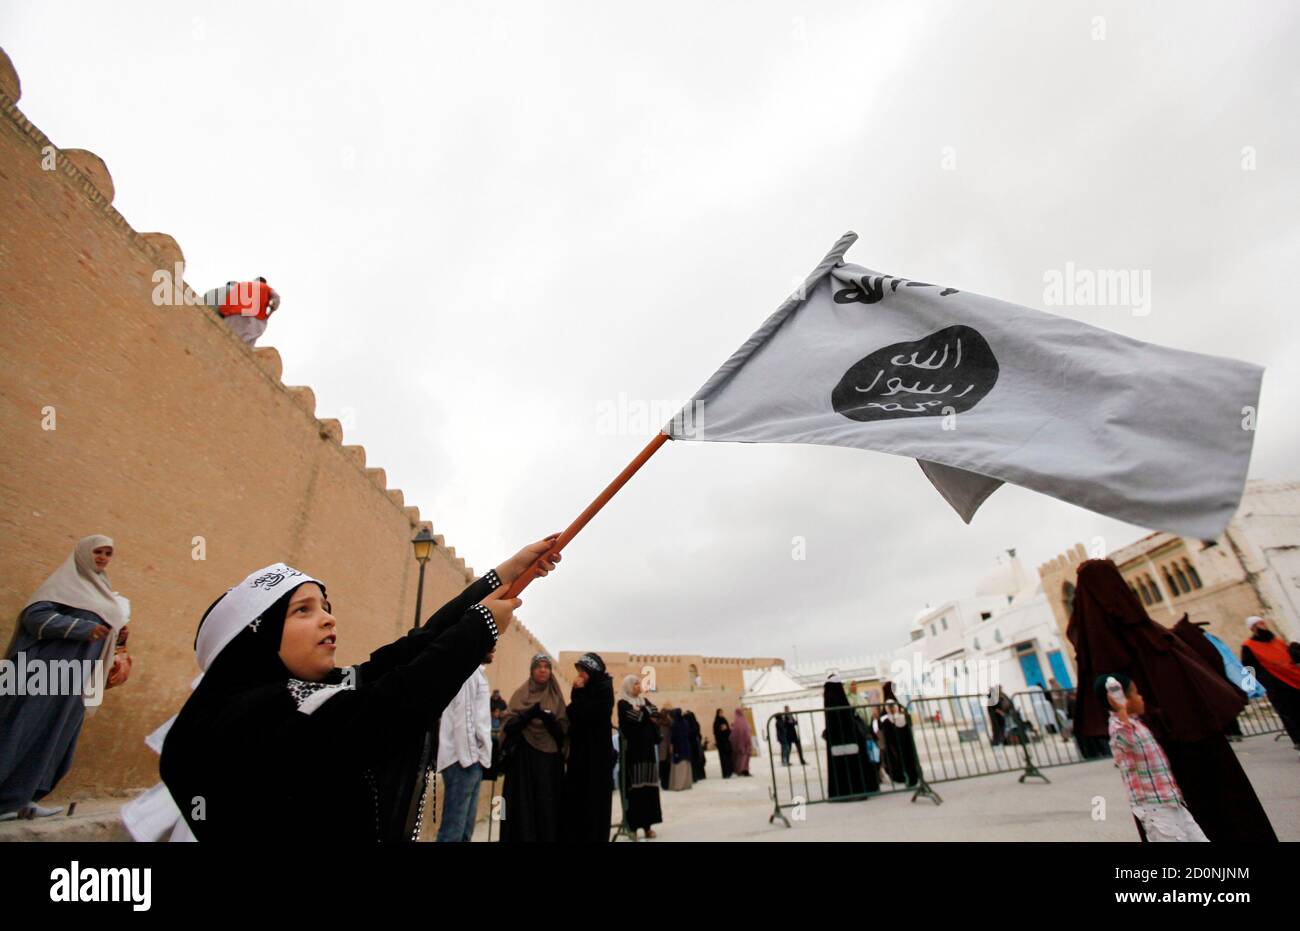 A young Tunisian girl dressed in black robes waves a white flag inscribed with Islamic verses at a rally of Salafi Islamists in the central town of Kairouan on May 20, 2012. Waving black flags embossed with Islamic verses, thousands of radical Islamists rallied in the central Tunisian town of Kairouan on Sunday to demand a wider role for religion in a country long considered one of the Arab world's most secular. REUTERS/Anis Mili (TUNISIA - Tags: RELIGION) ) Stock Photo